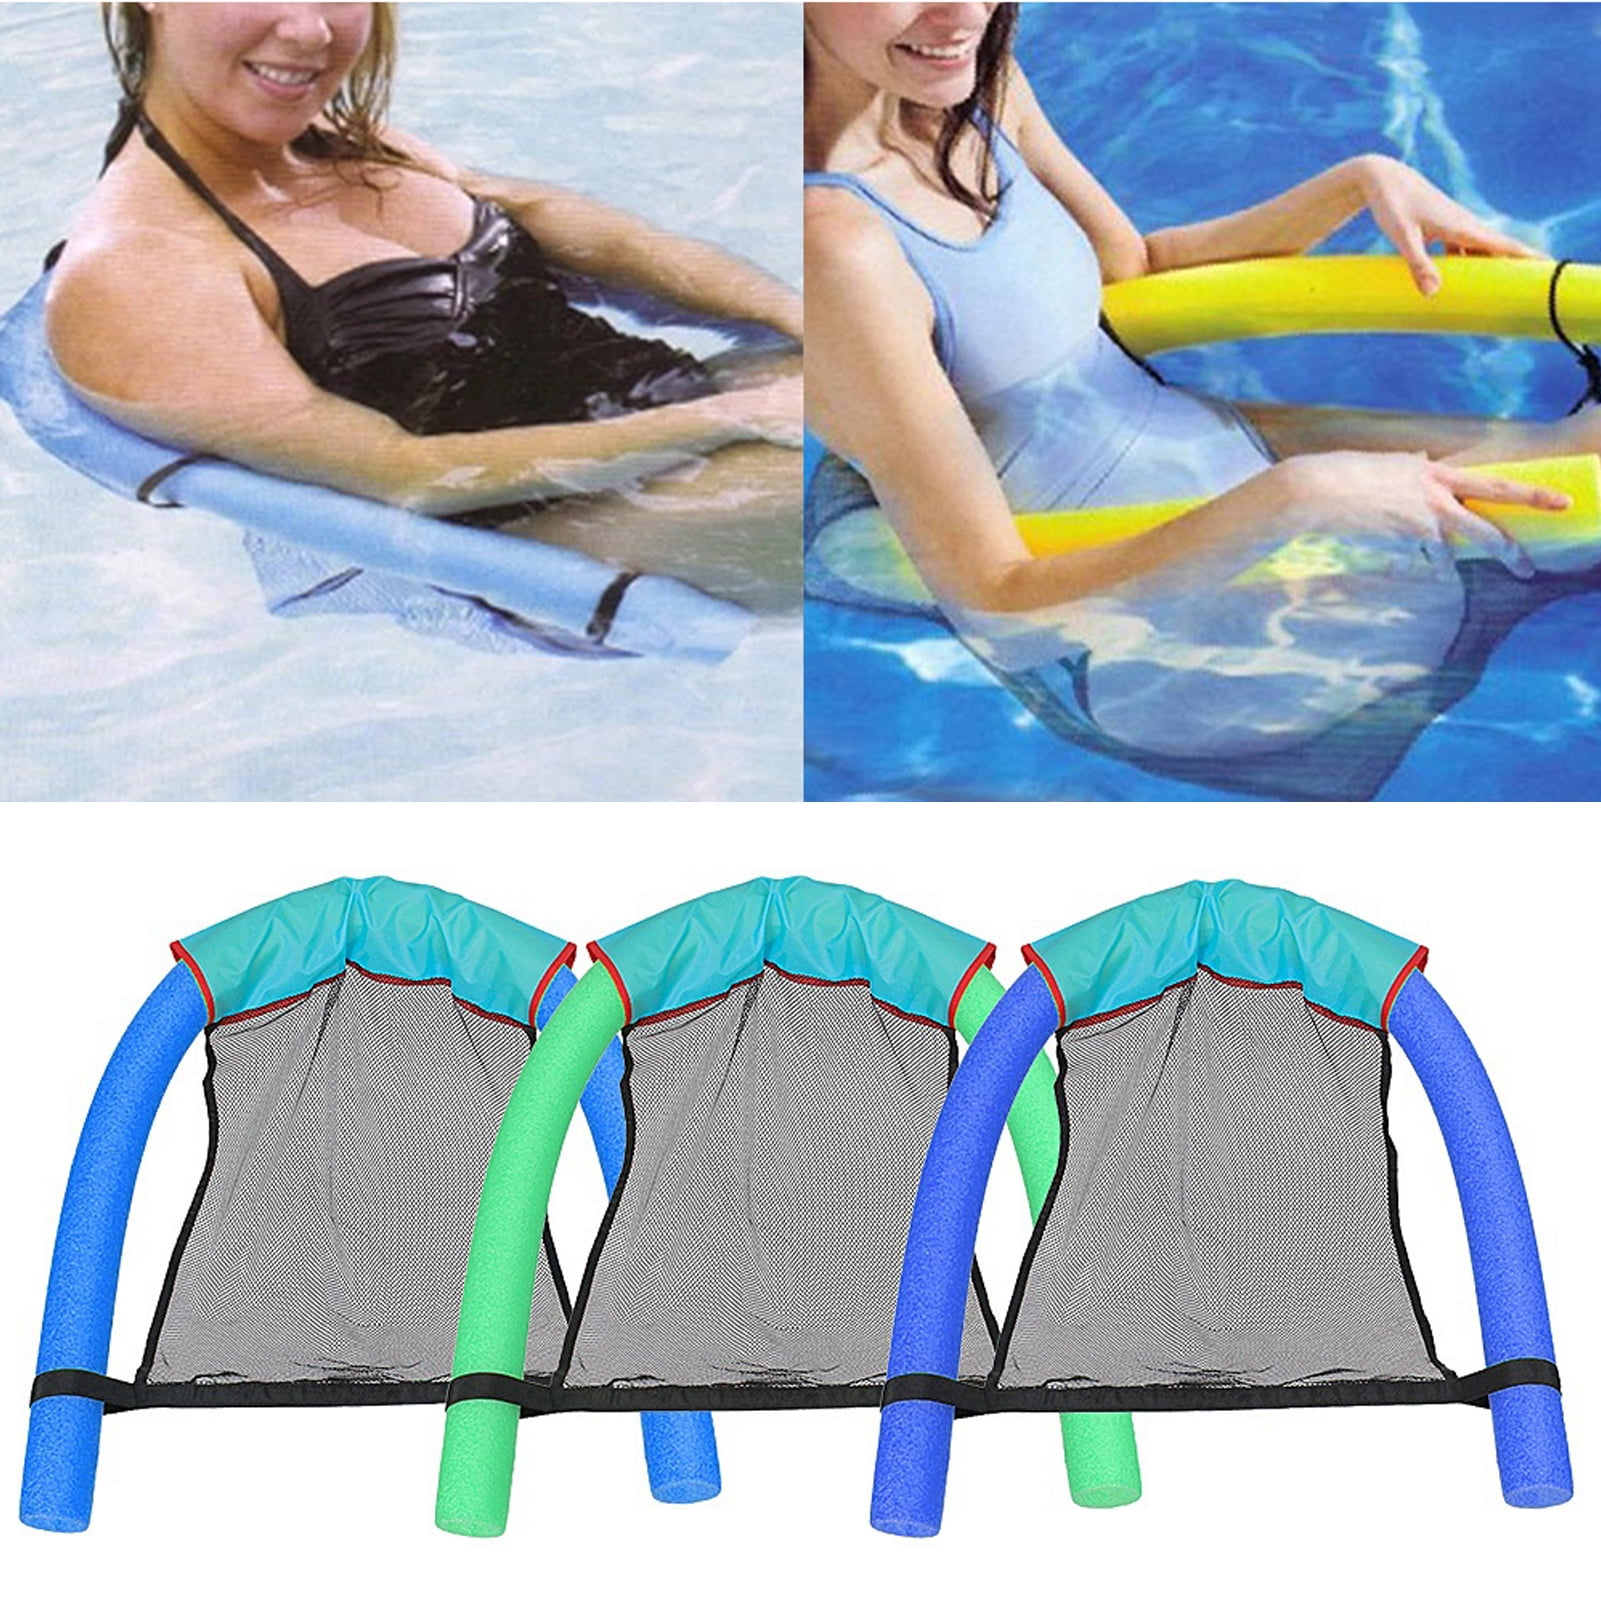 Details about   Pool Floating Chair Swimming Pools Seat Bed Mesh Net Noodle Chairs Adult Kid 